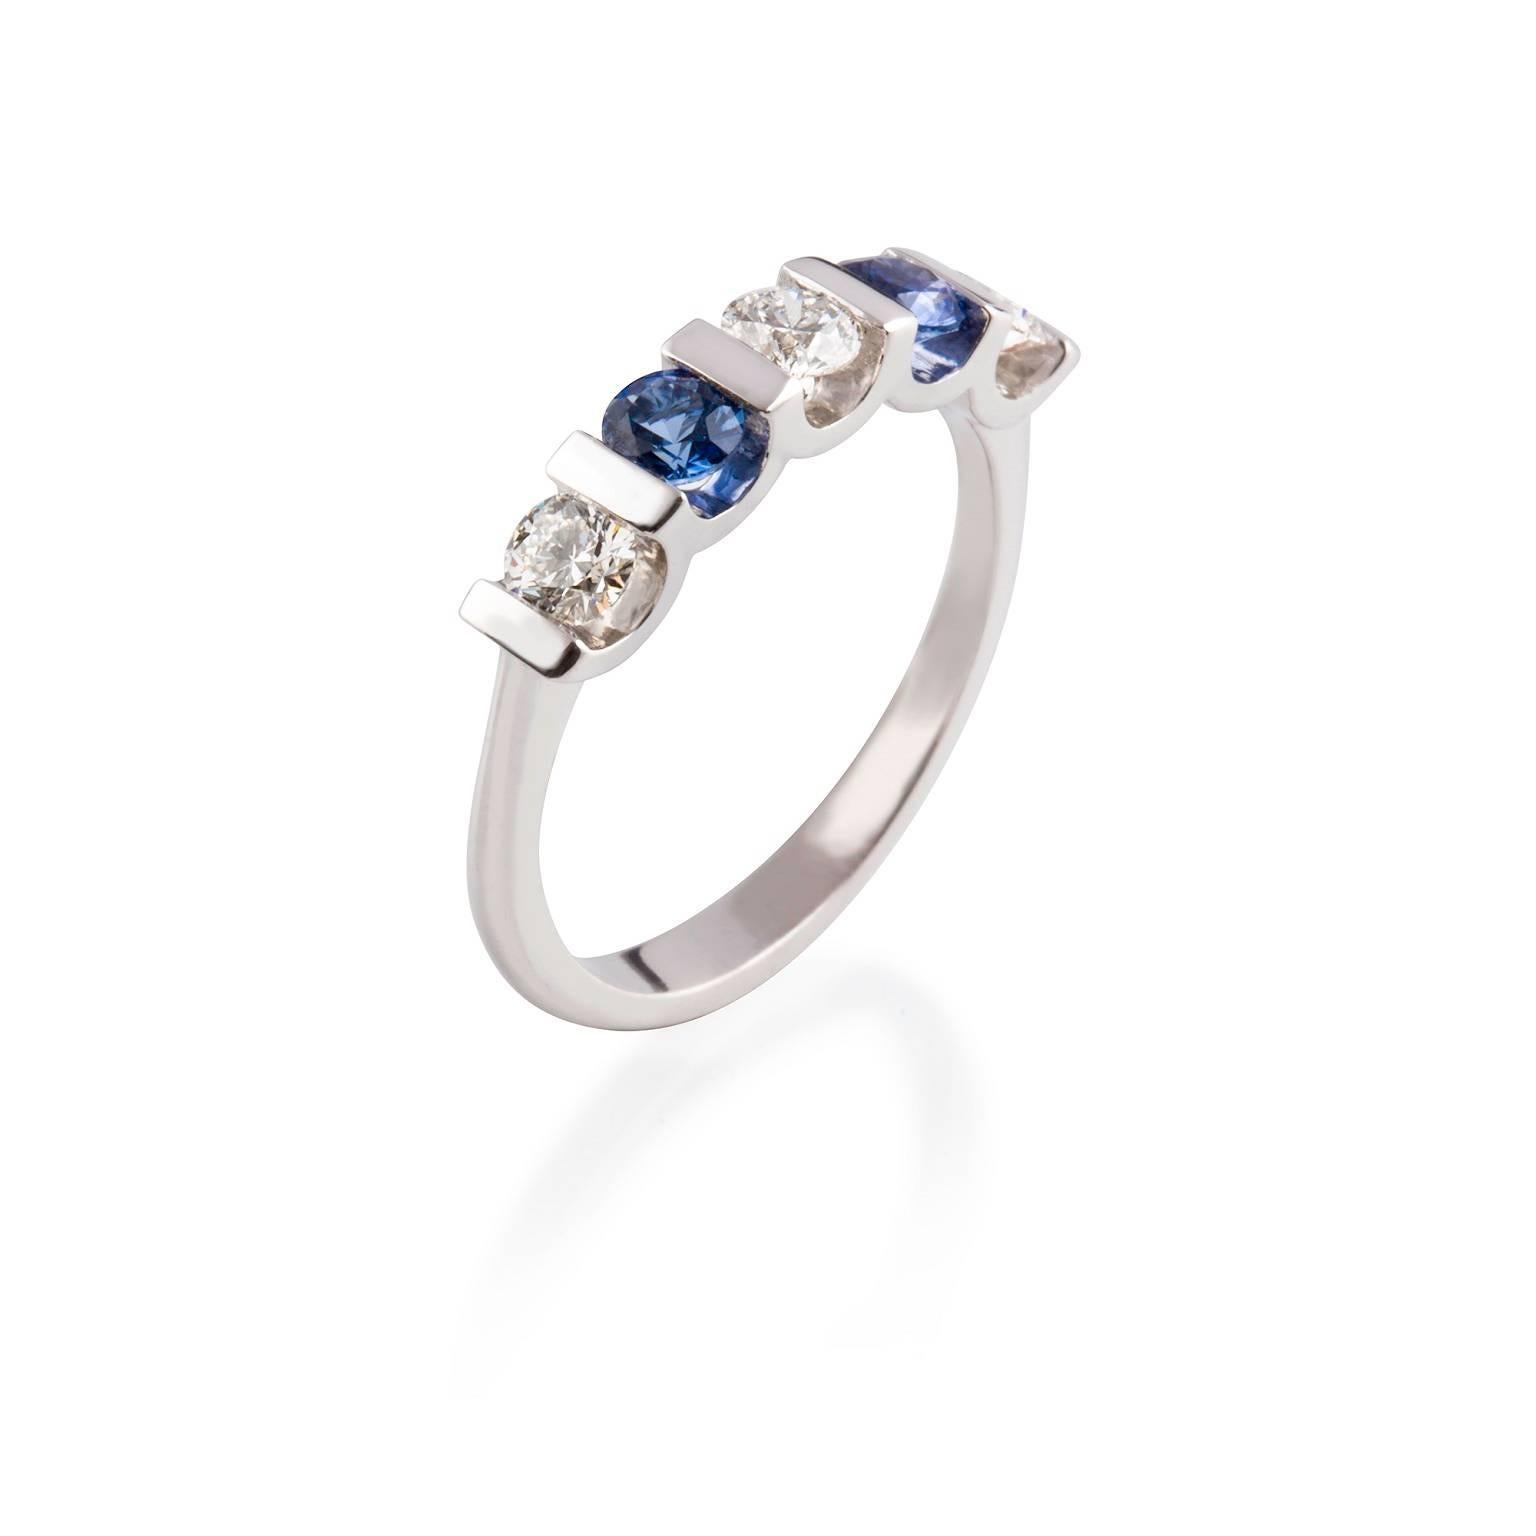 Oceania Ring

This classic 18ct white gold band with alternating Ceylon sapphires and diamonds is both understated and elegant.  

Round faceted sapphires: medium blue colour, Ceylon origin, 3.66 x 3.69mm, 
0.62ct total weight

Round brilliant cut